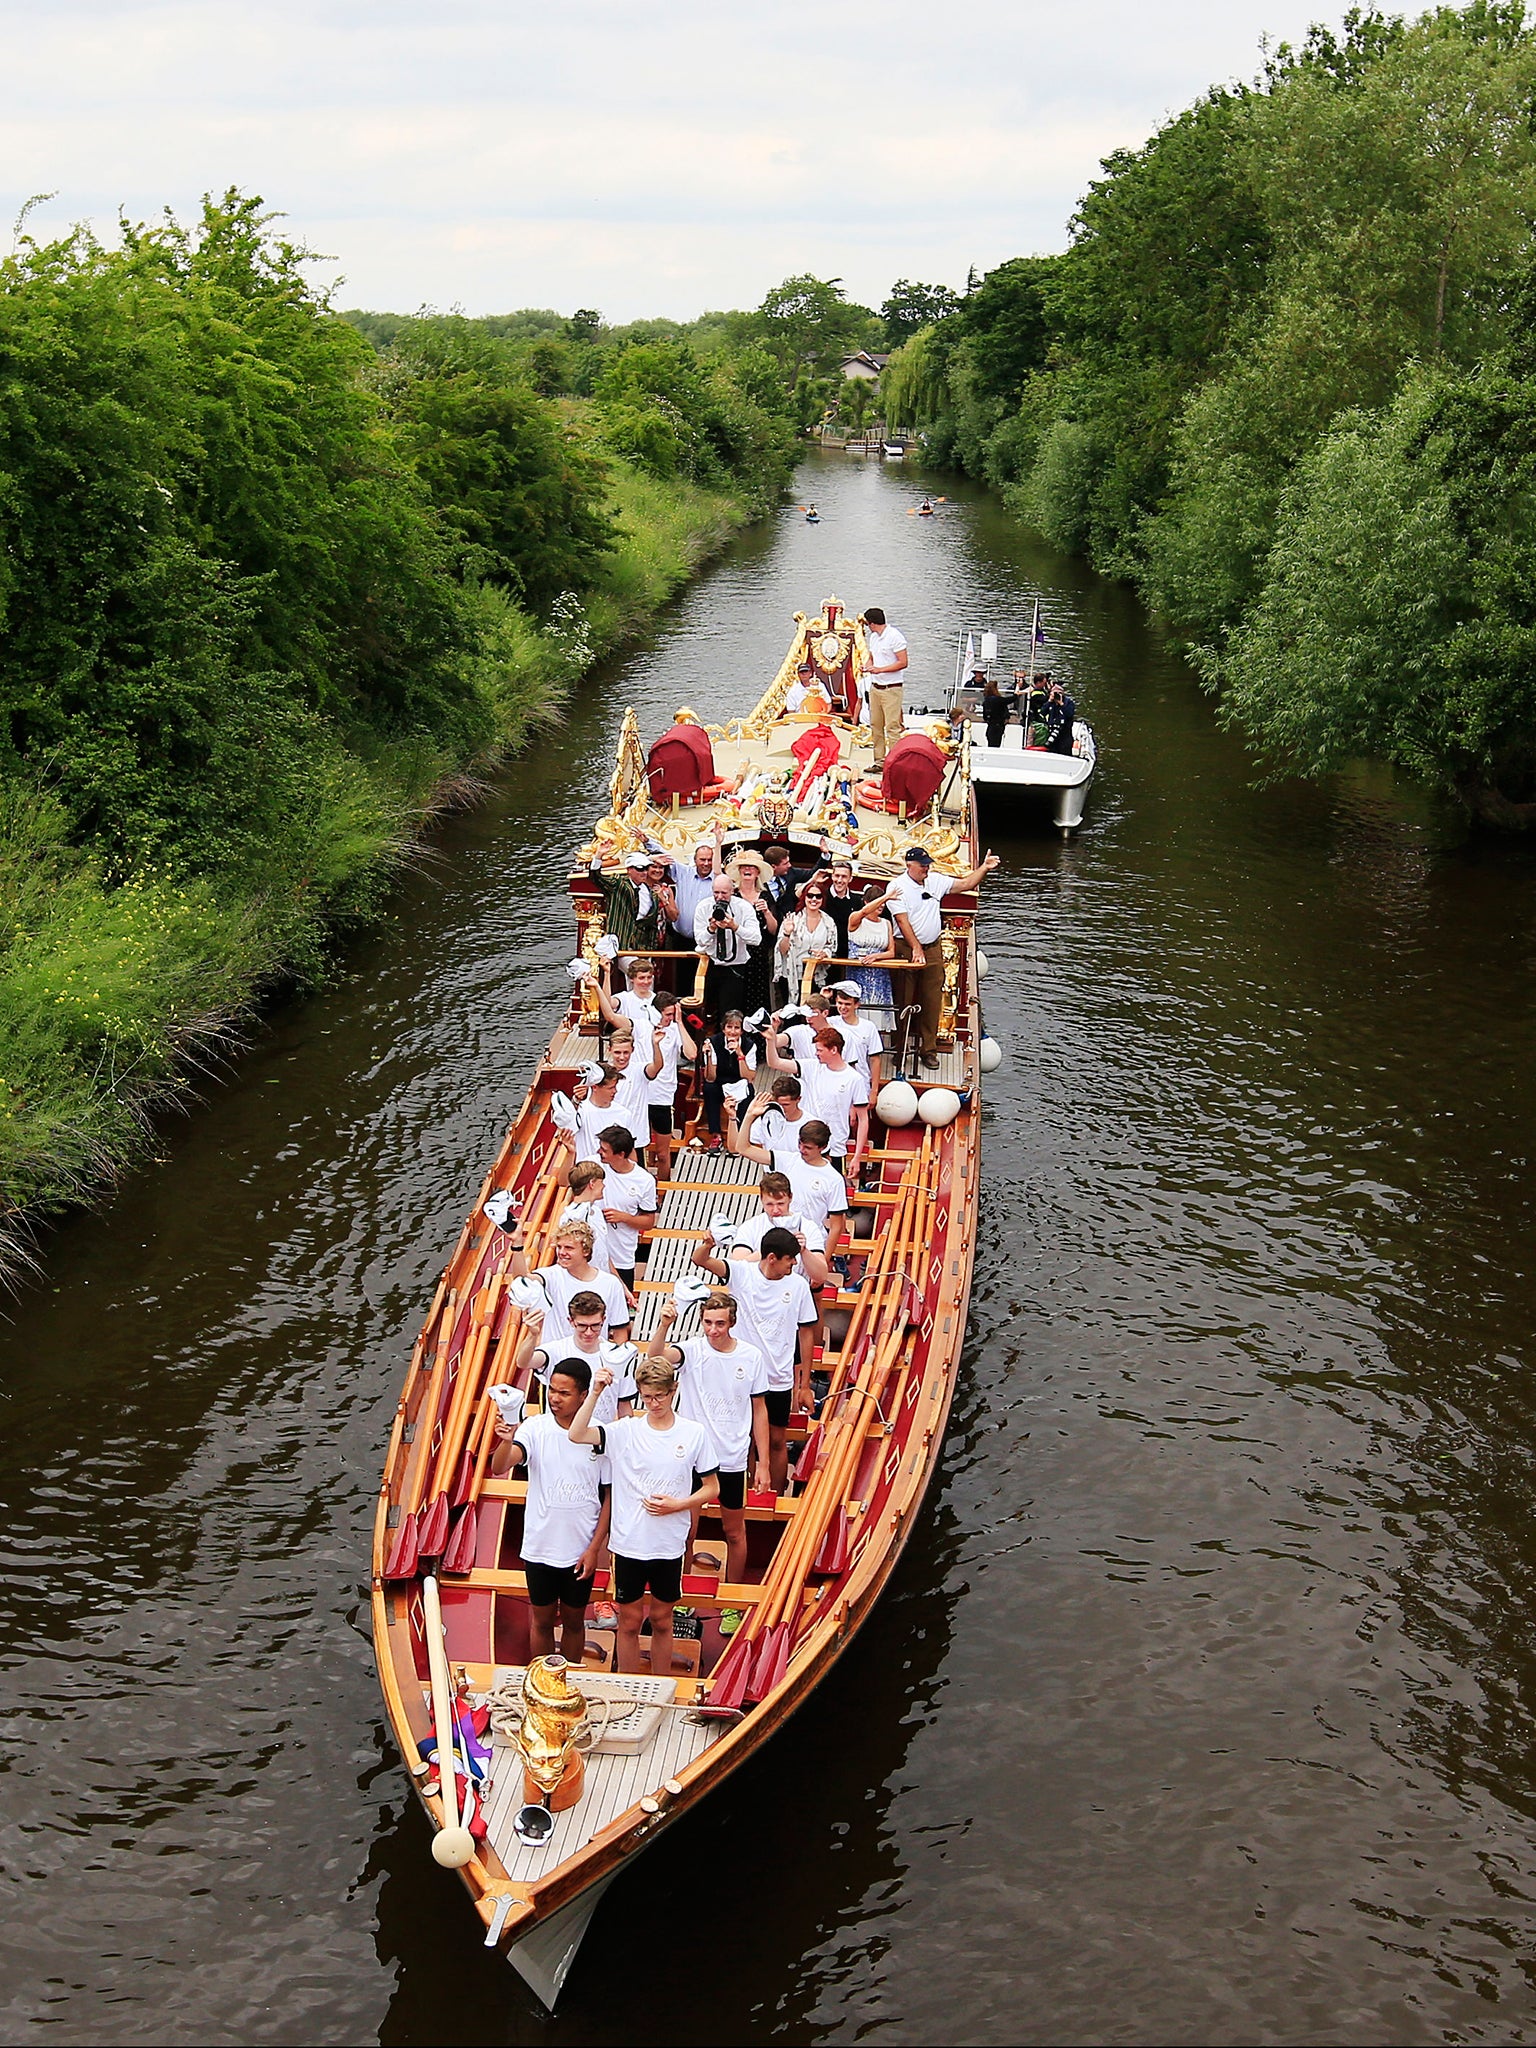 The Royal Barge ‘Gloriana’ passing through Old Windsor Lock on the Thames to mark the 800th anniversary of the sealing of Magna Carta